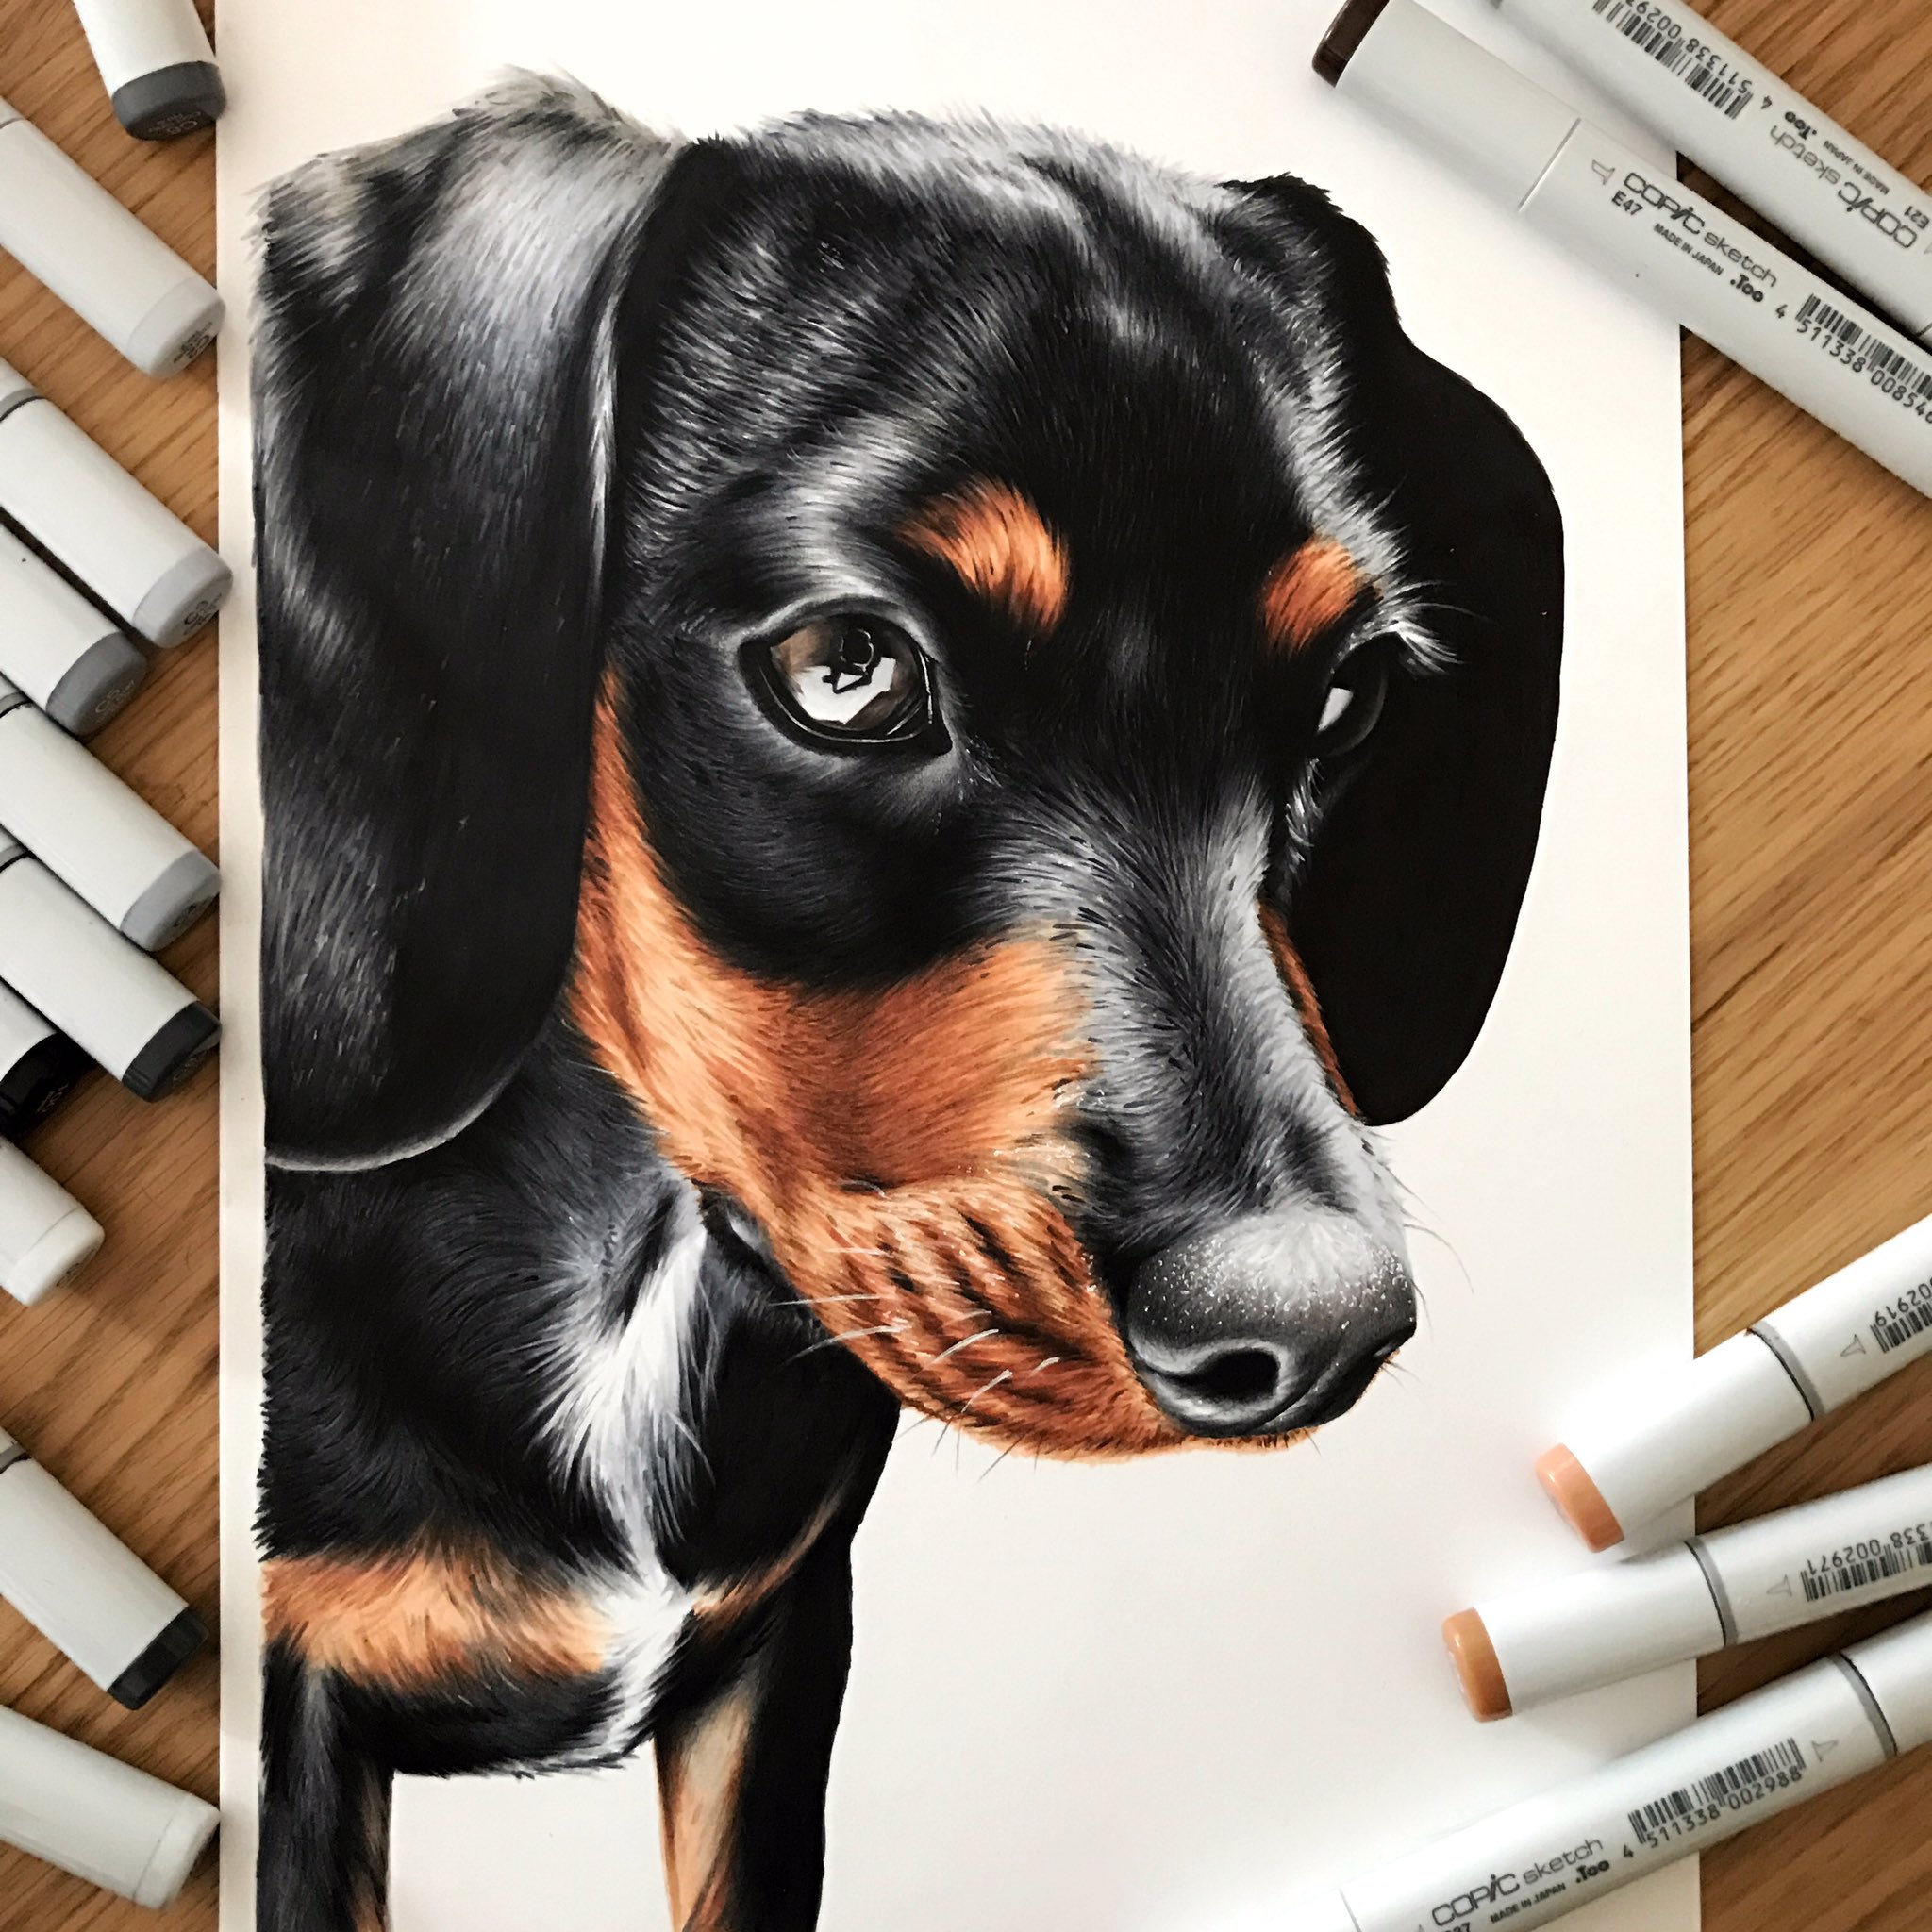 Ward Art on Twitter: "Drawing of Ollie 🐶😁 90% drawn with @copicmarker ✏️ black and white pencils for extra detail and white gel pen for highlights.